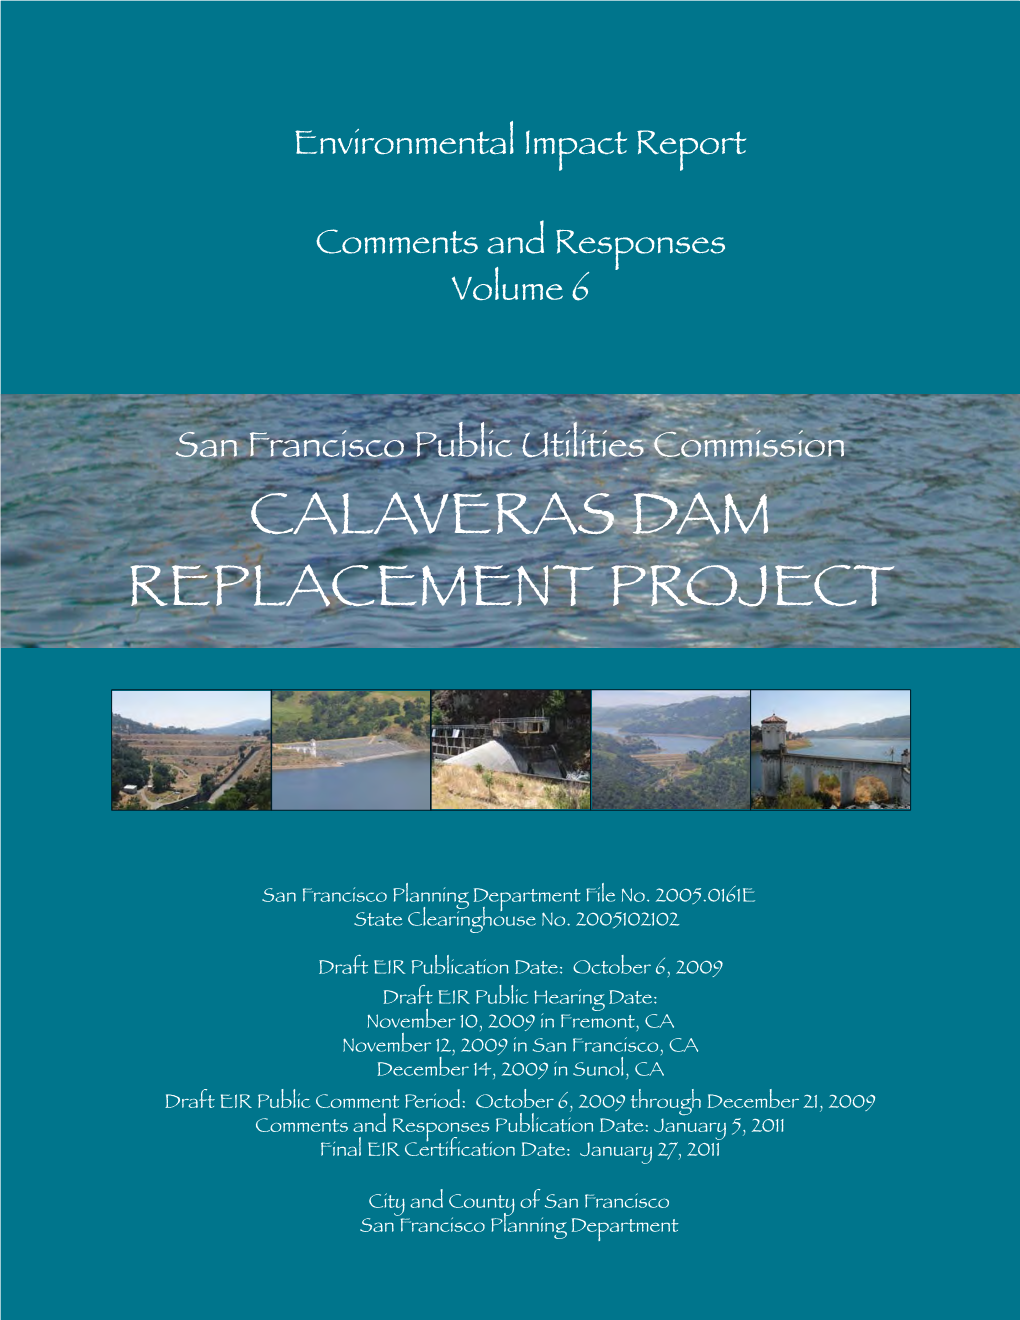 SFPUC Calaveras Dam Replacement Project DEIR December 21, 2009 Technical Comments on Fishery Resources Issues